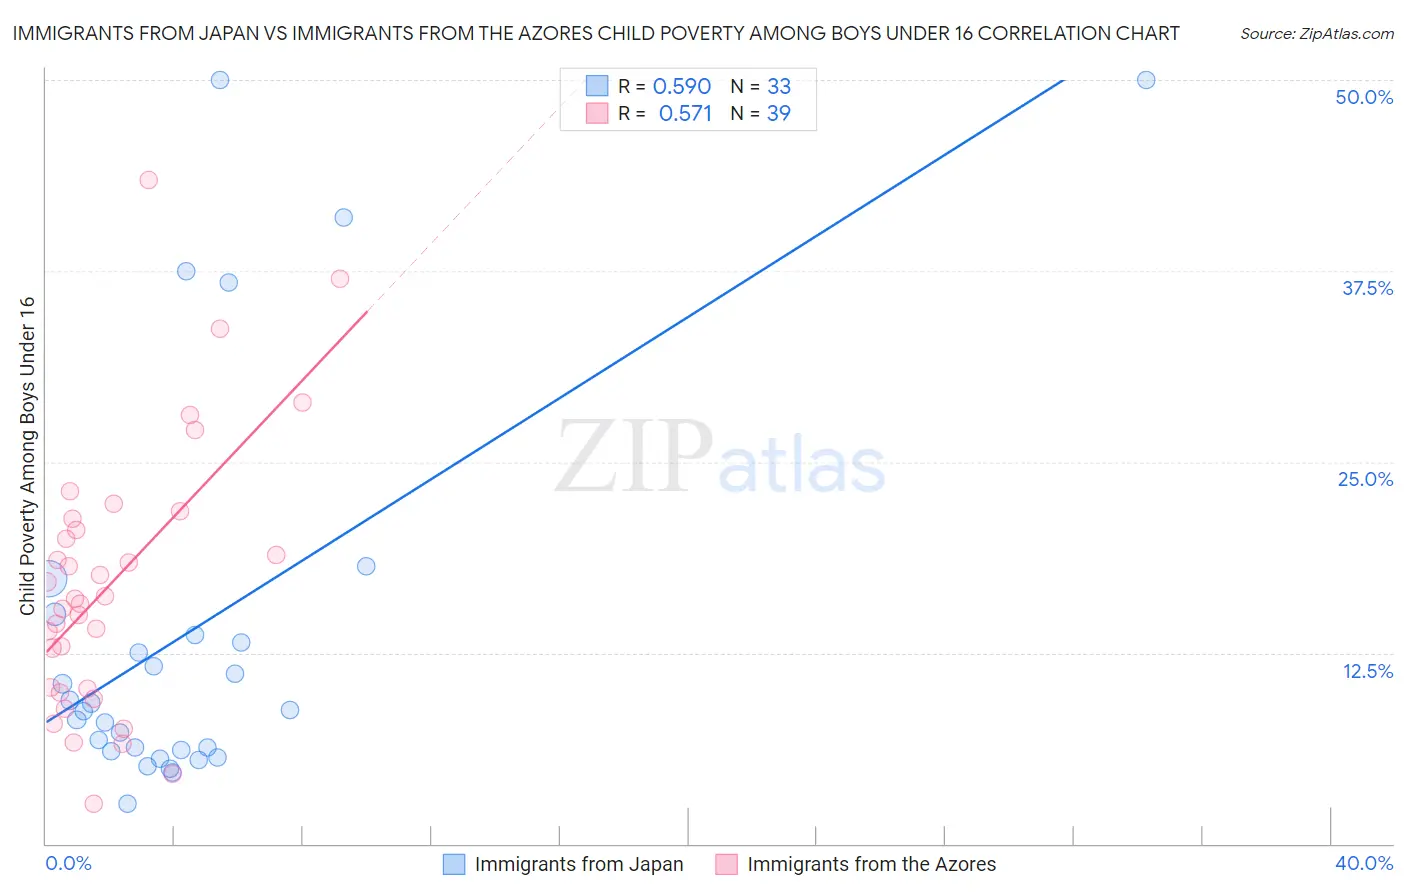 Immigrants from Japan vs Immigrants from the Azores Child Poverty Among Boys Under 16